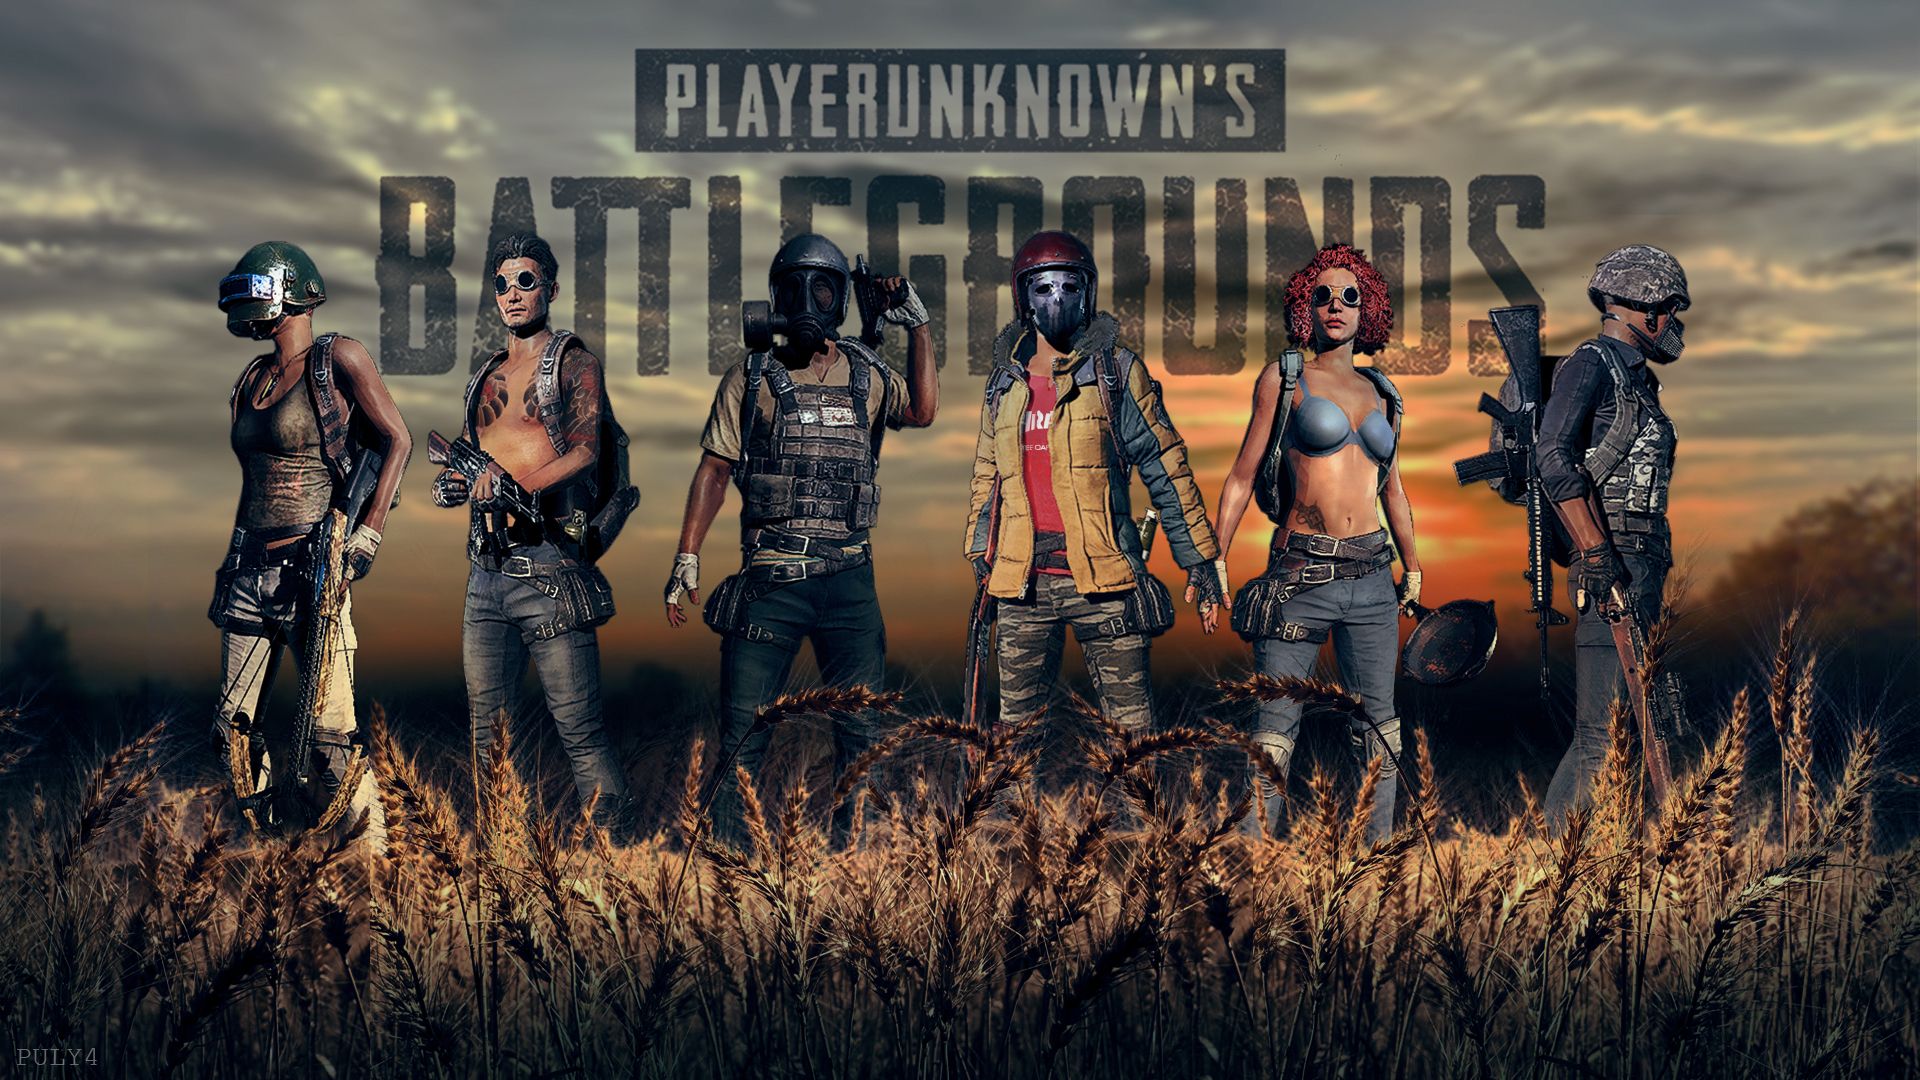 Pubg Wallpapers High Quality Resolution On Wallpaper 1080p HD